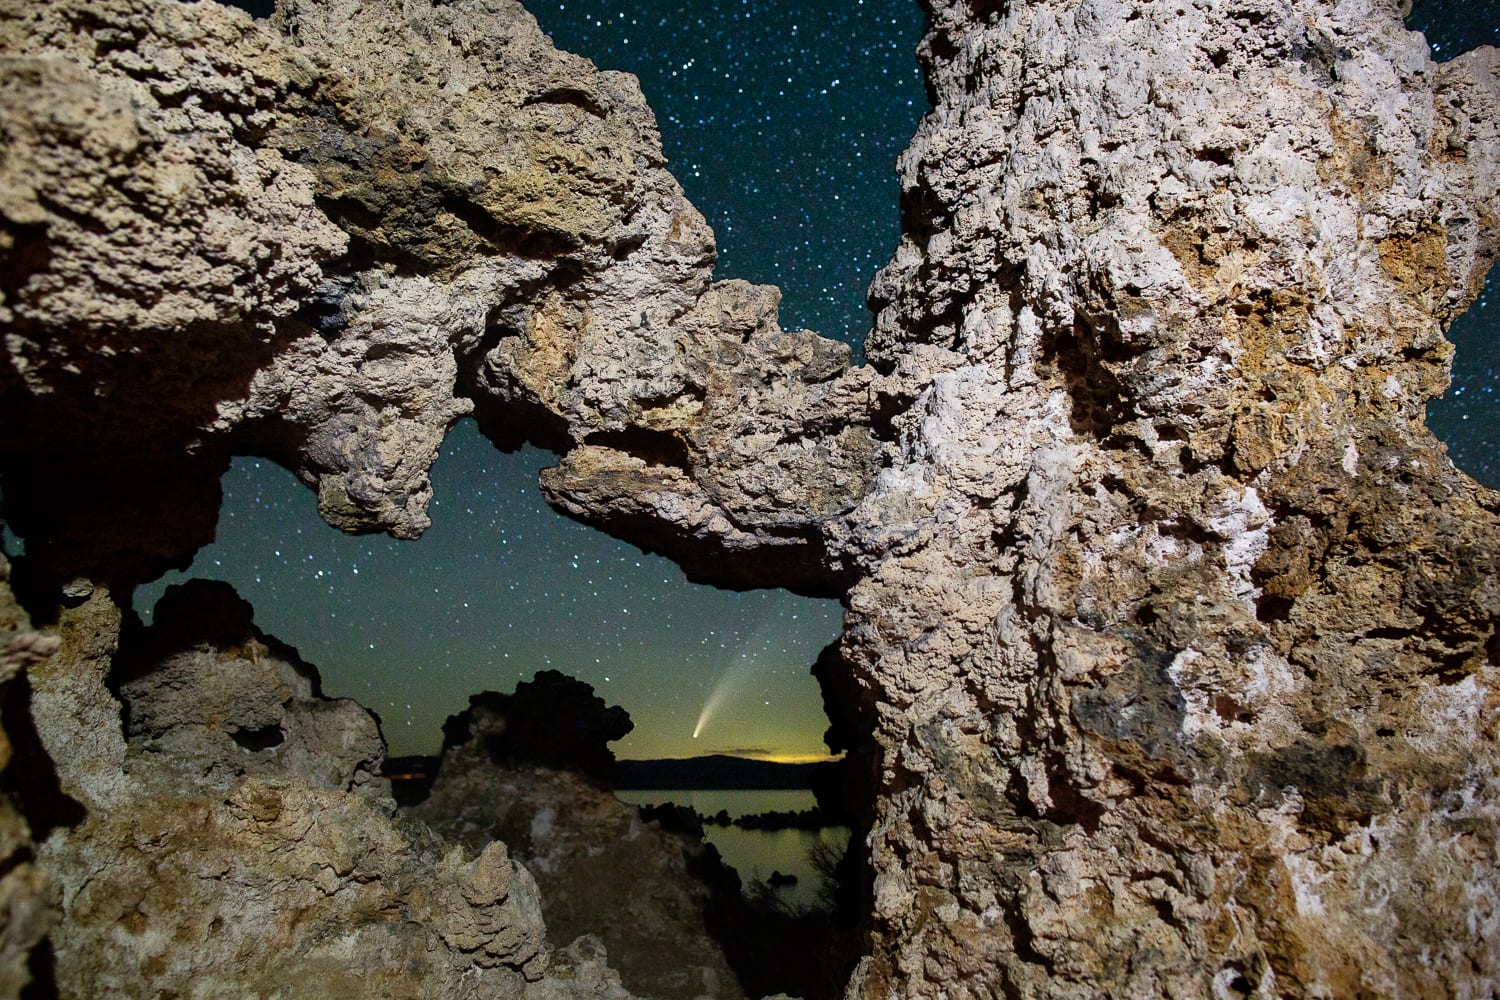 The Neowise Comet is visible through a Tufa formation at Mono Lake.